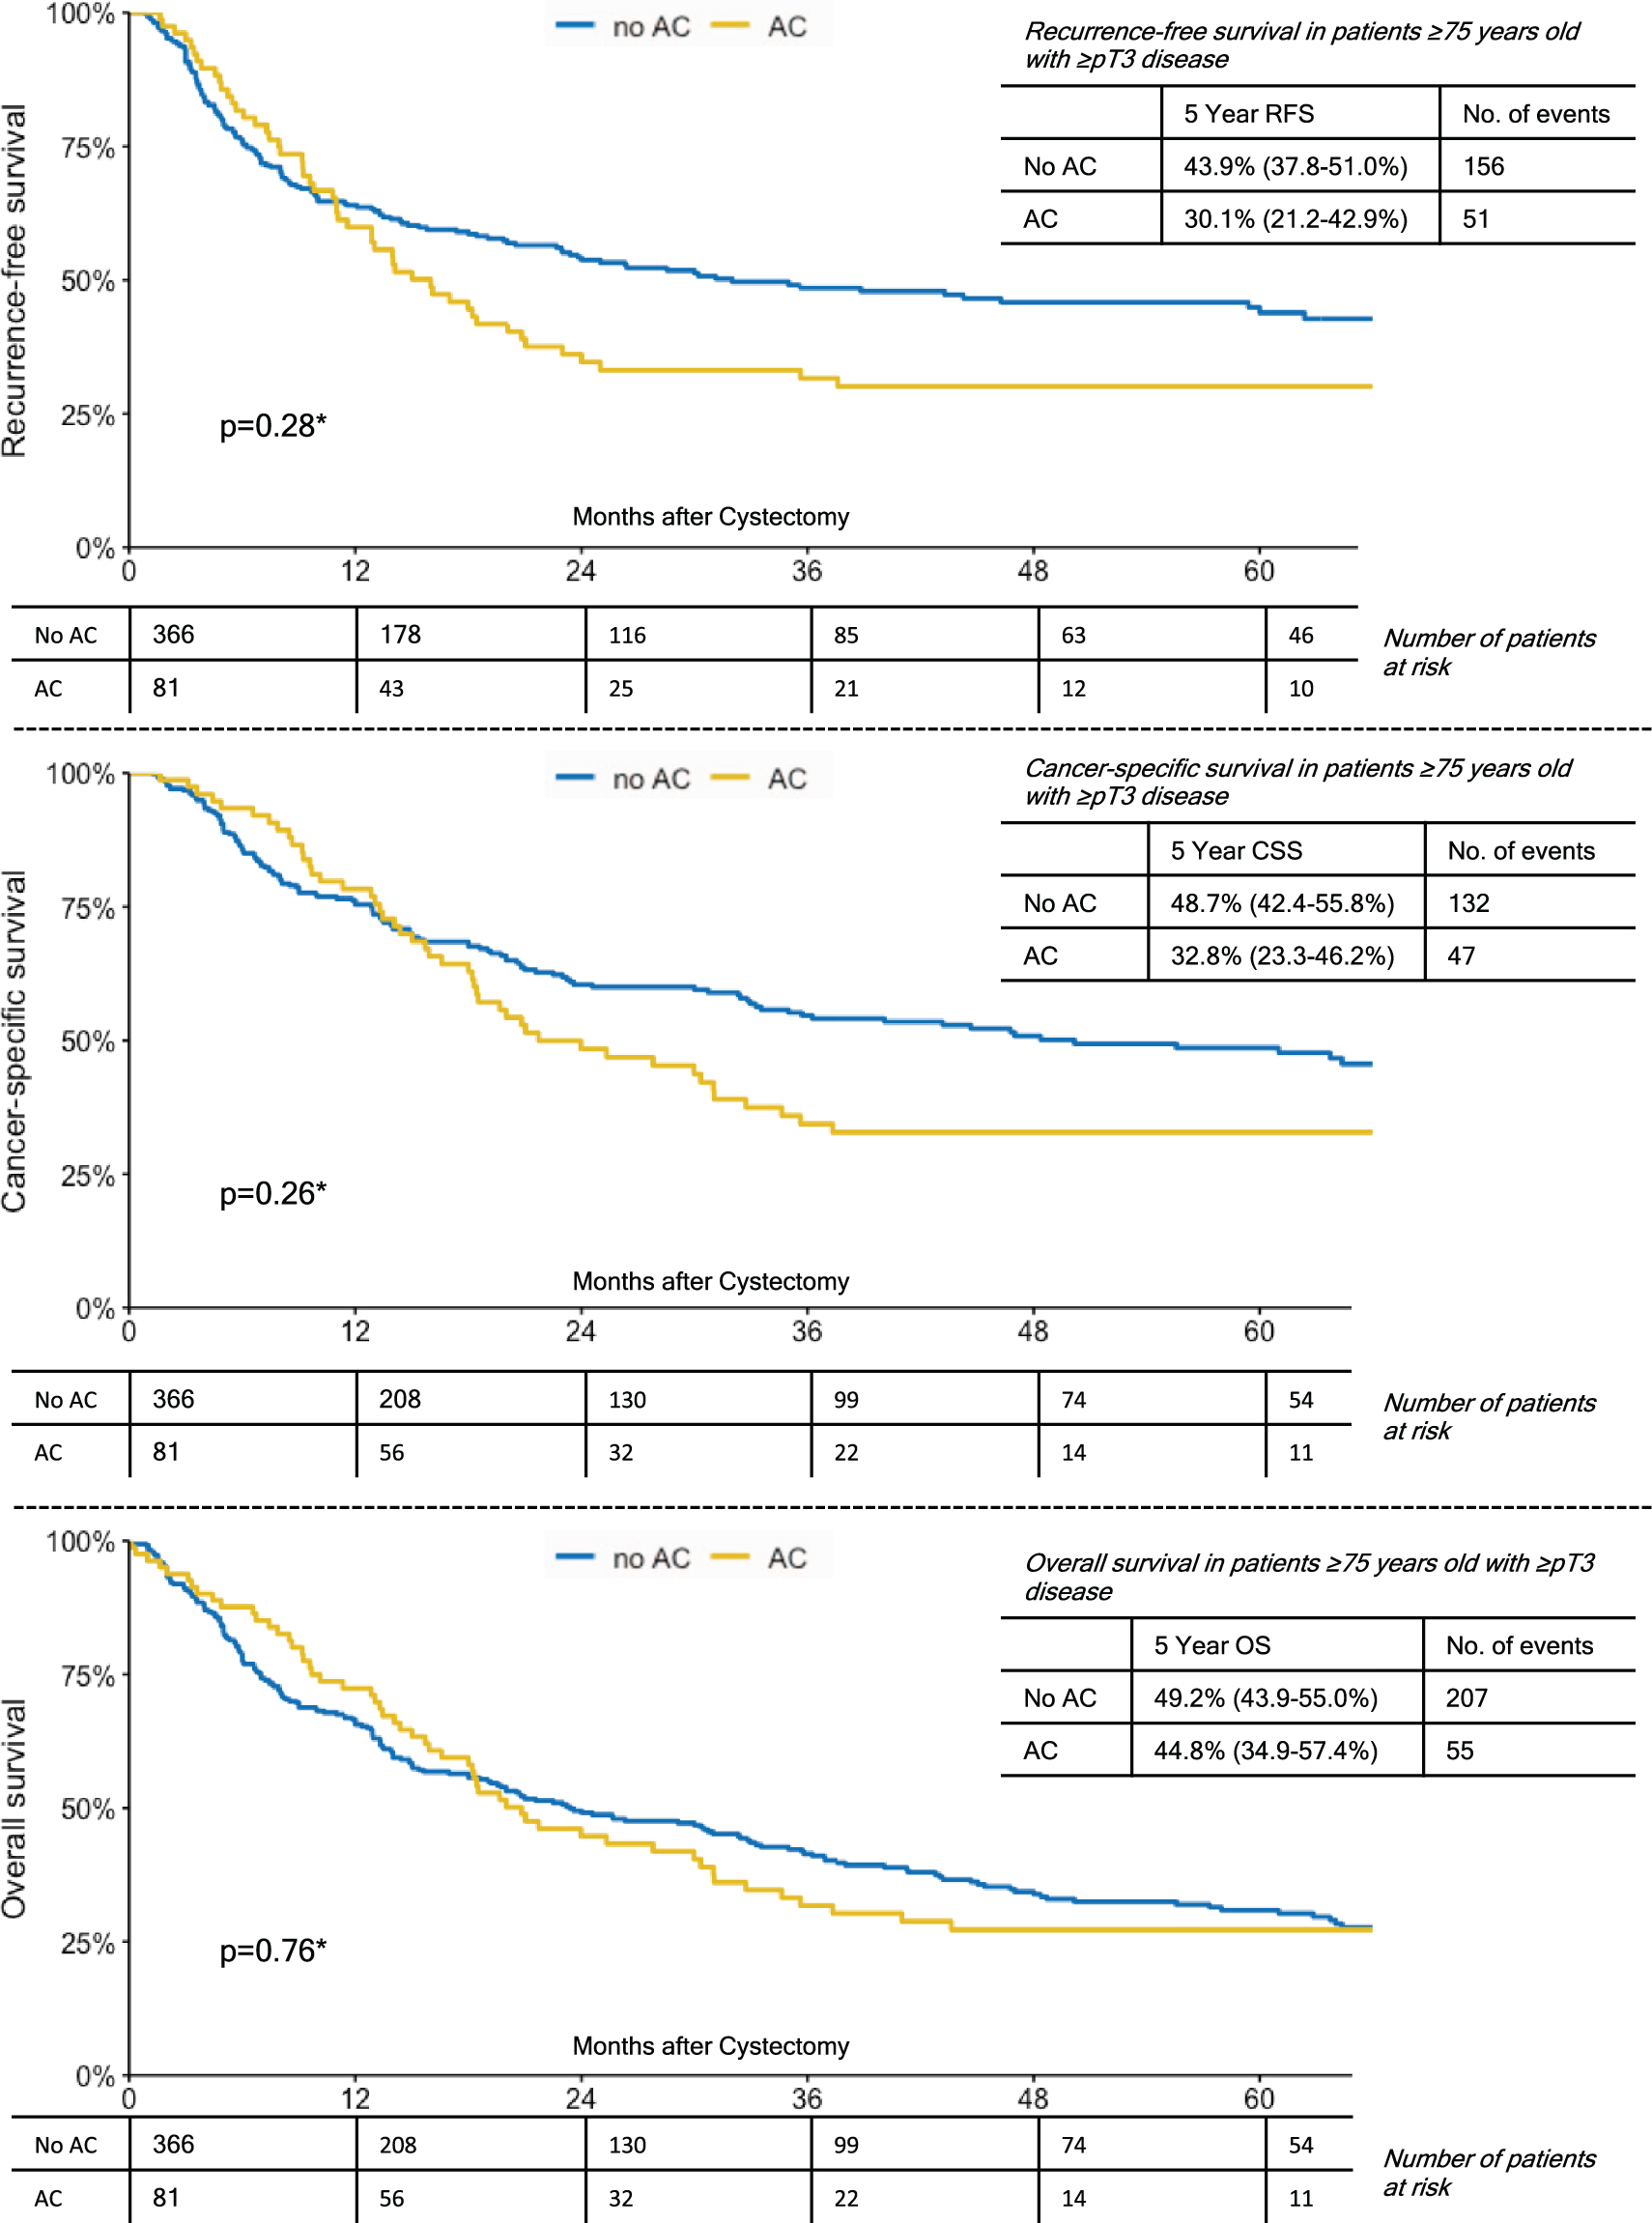 Kaplan-Meier Curves Demonstrating The Effect of Adjuvant Chemotherapy on Recurrence-Free Survival; Cancer-Specific Survival and Overall Survival in Patients ≥75 Years Old with ≥pT3 Disease.